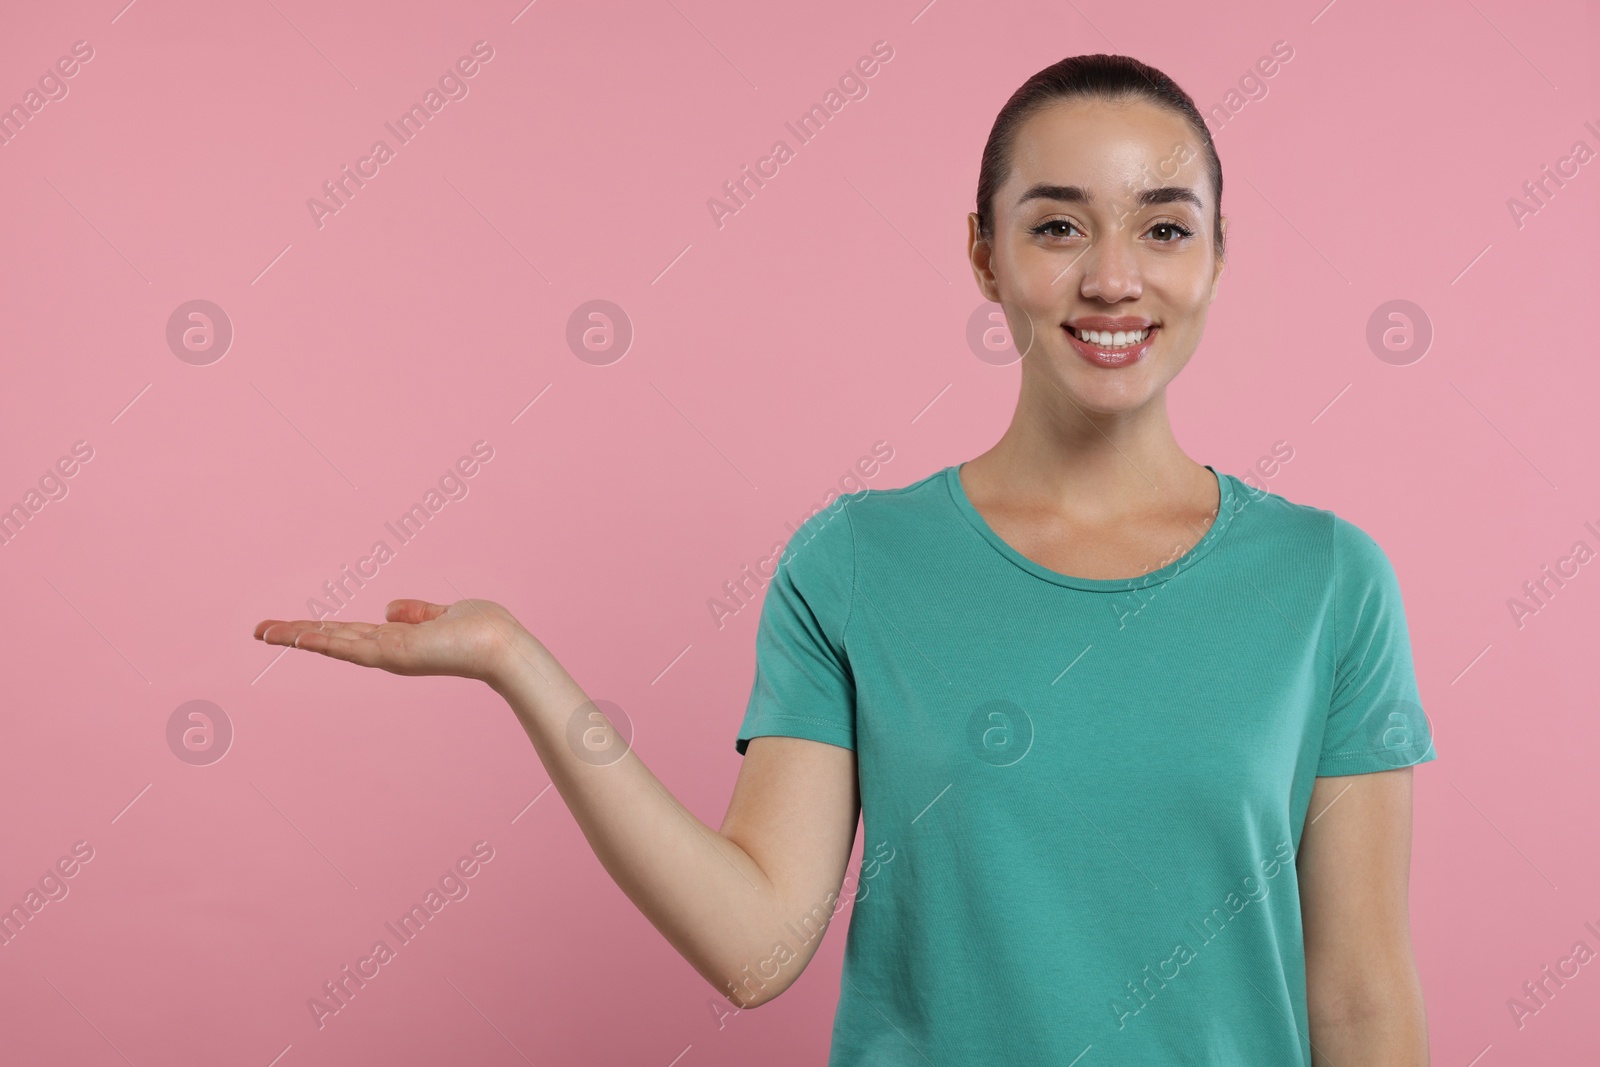 Photo of Special promotion. Smiling woman holding something on pink background. Space for text